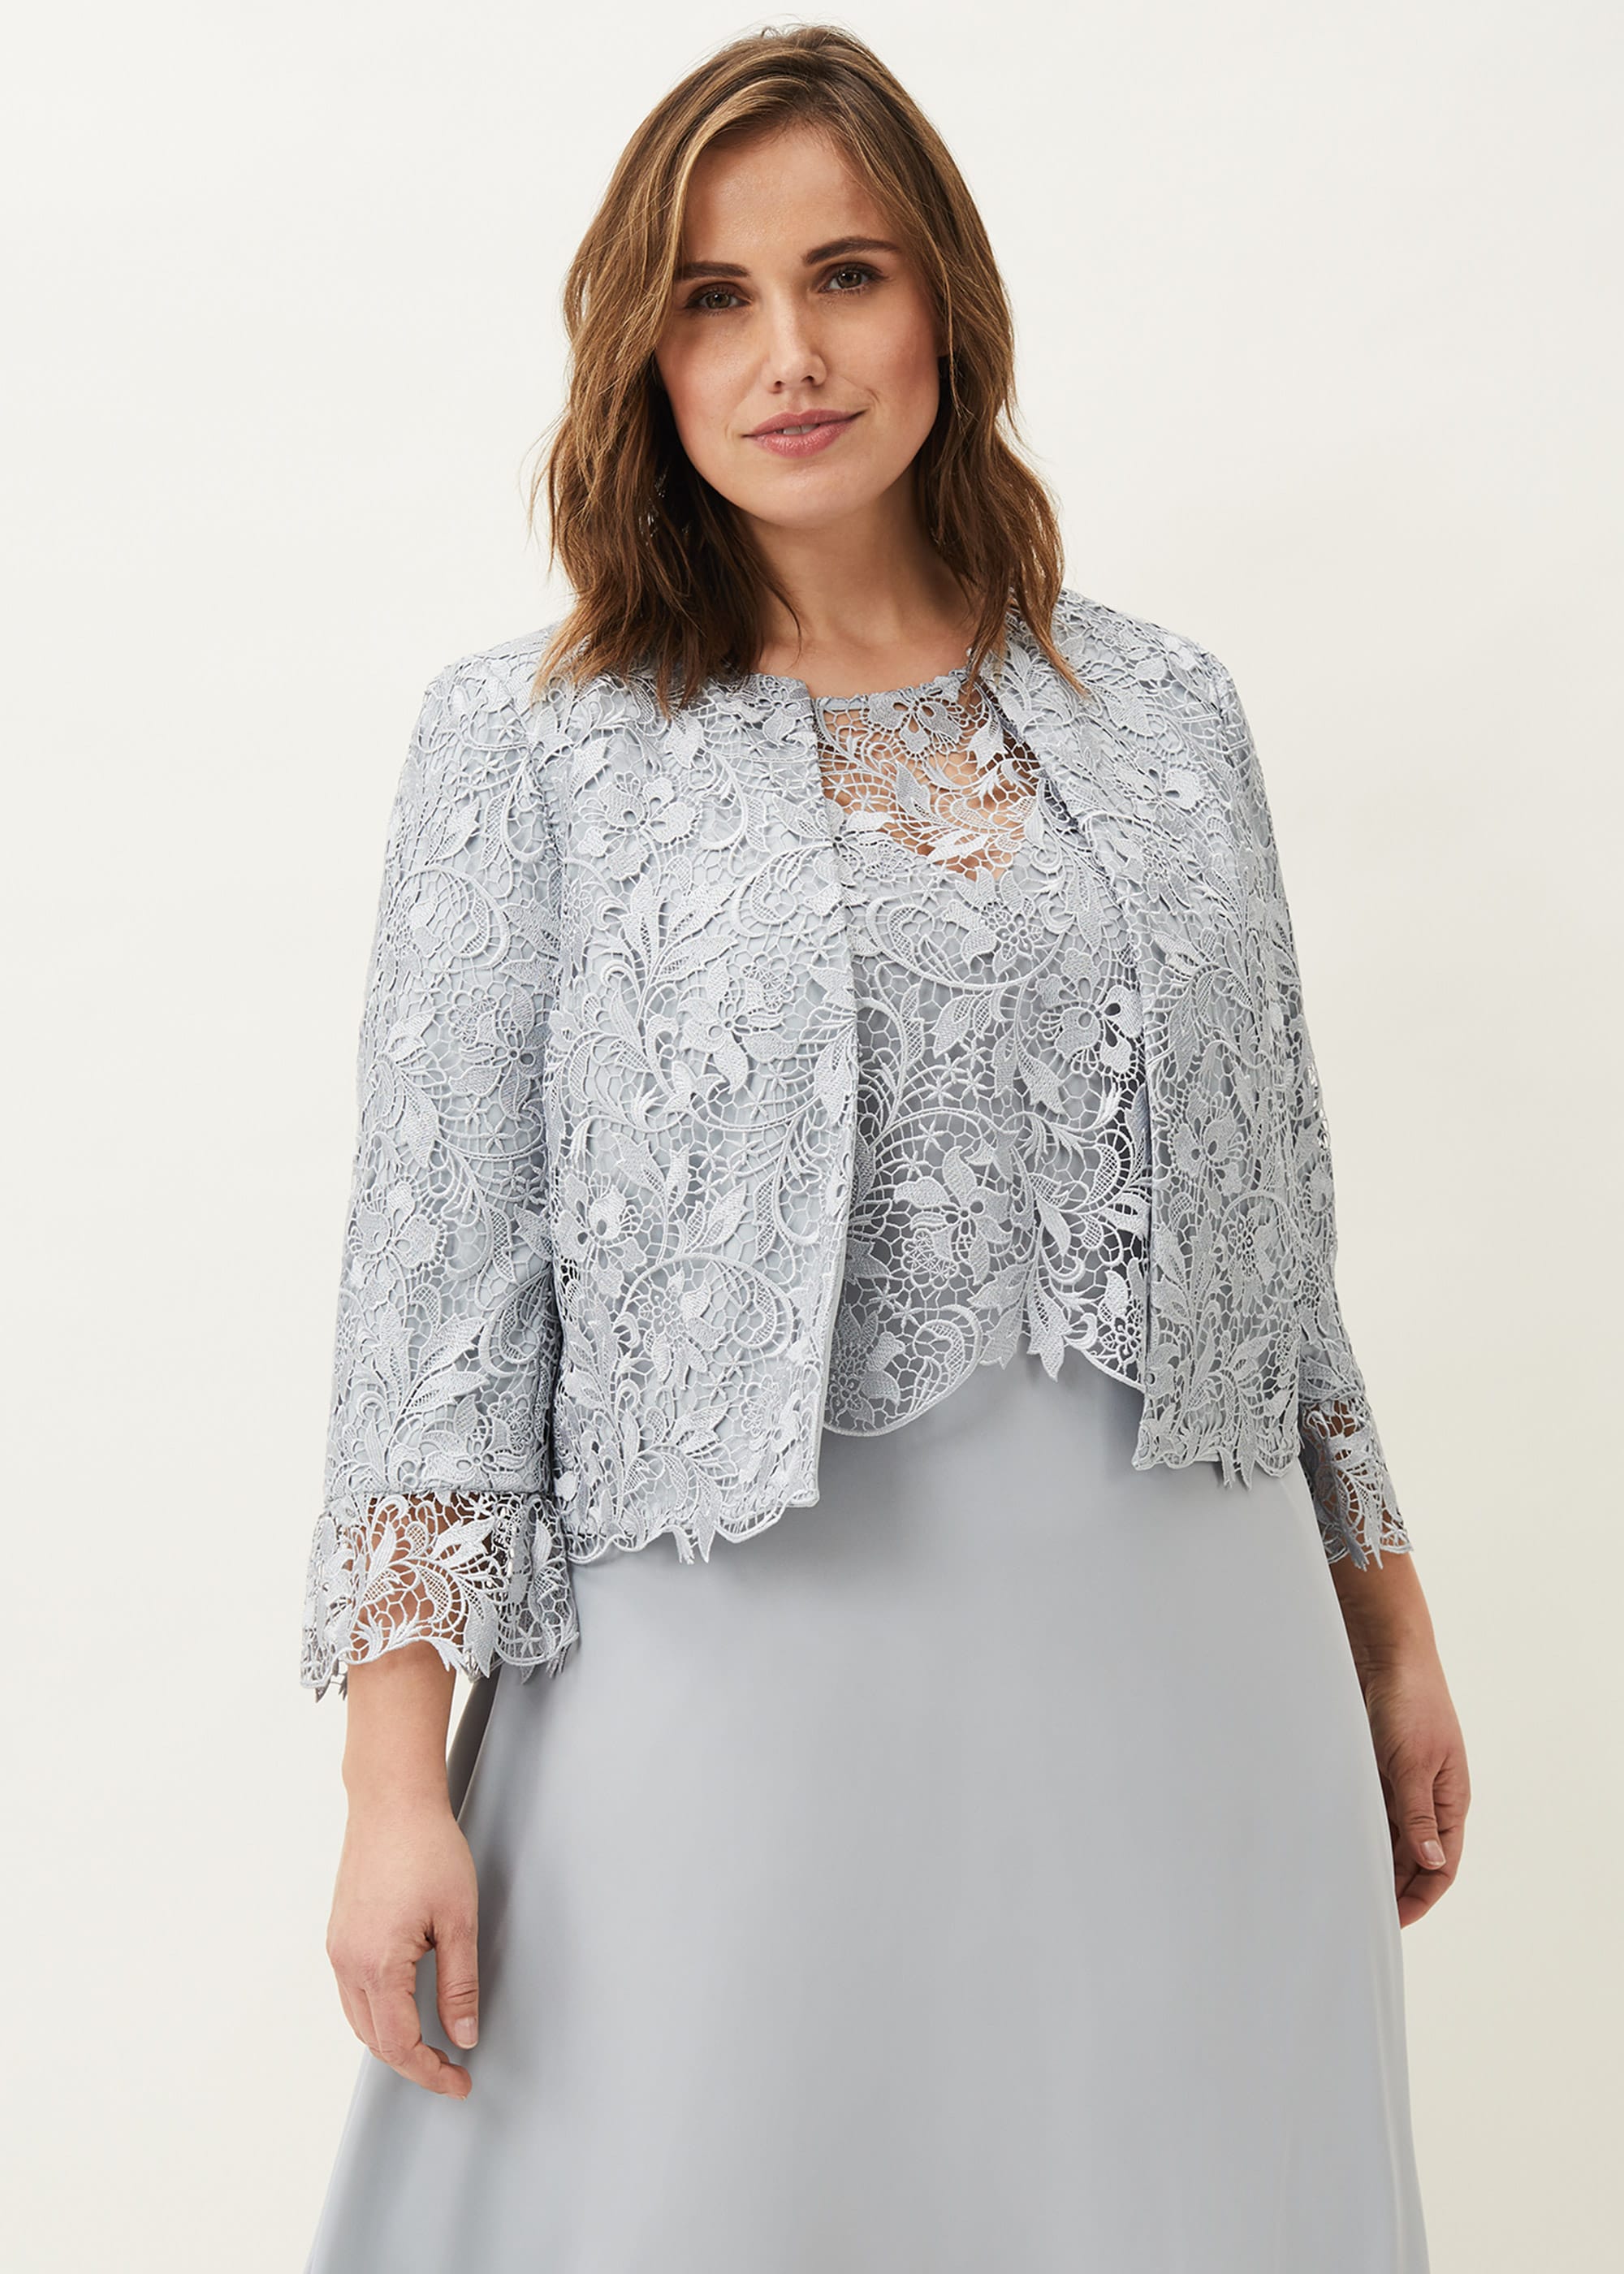 Phase Eight Women's Luisa Lace Occasion Jacket